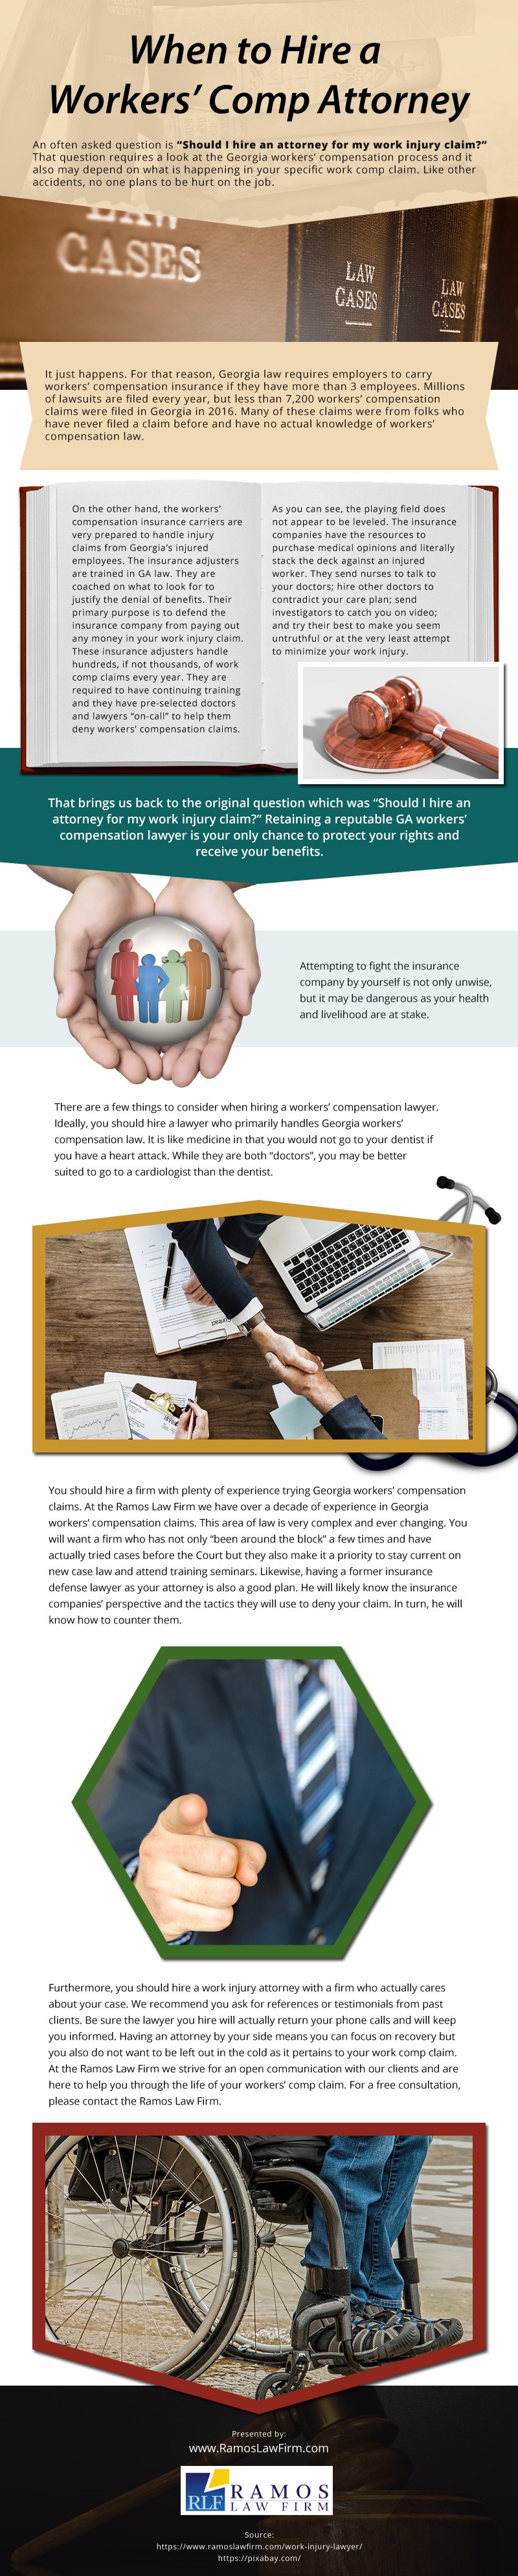 When-to-Hire-a-Workers-Comp-Attorney Infographic